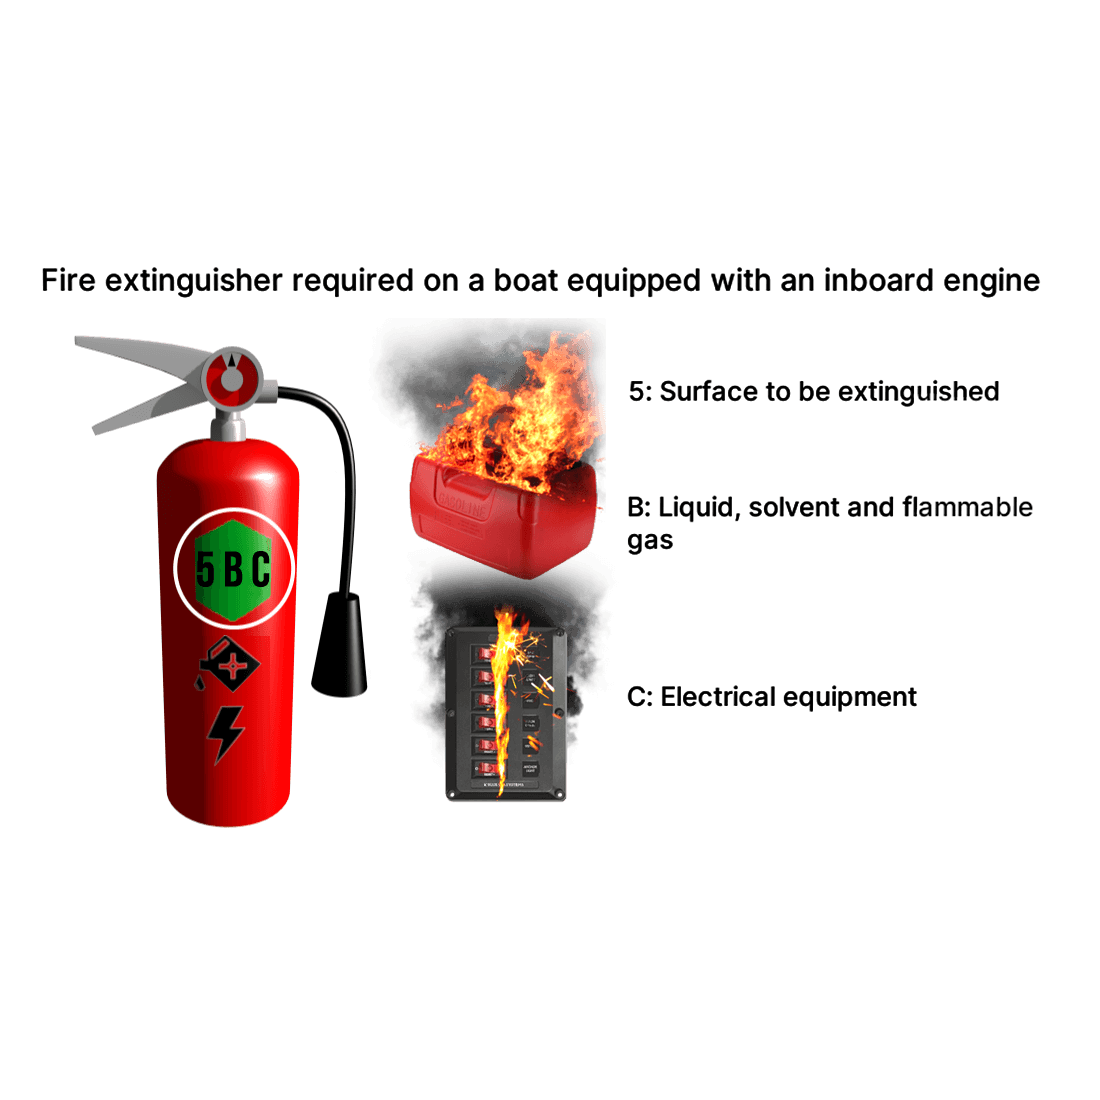 Boat Fire Extinguisher: Types, Number and Location Required